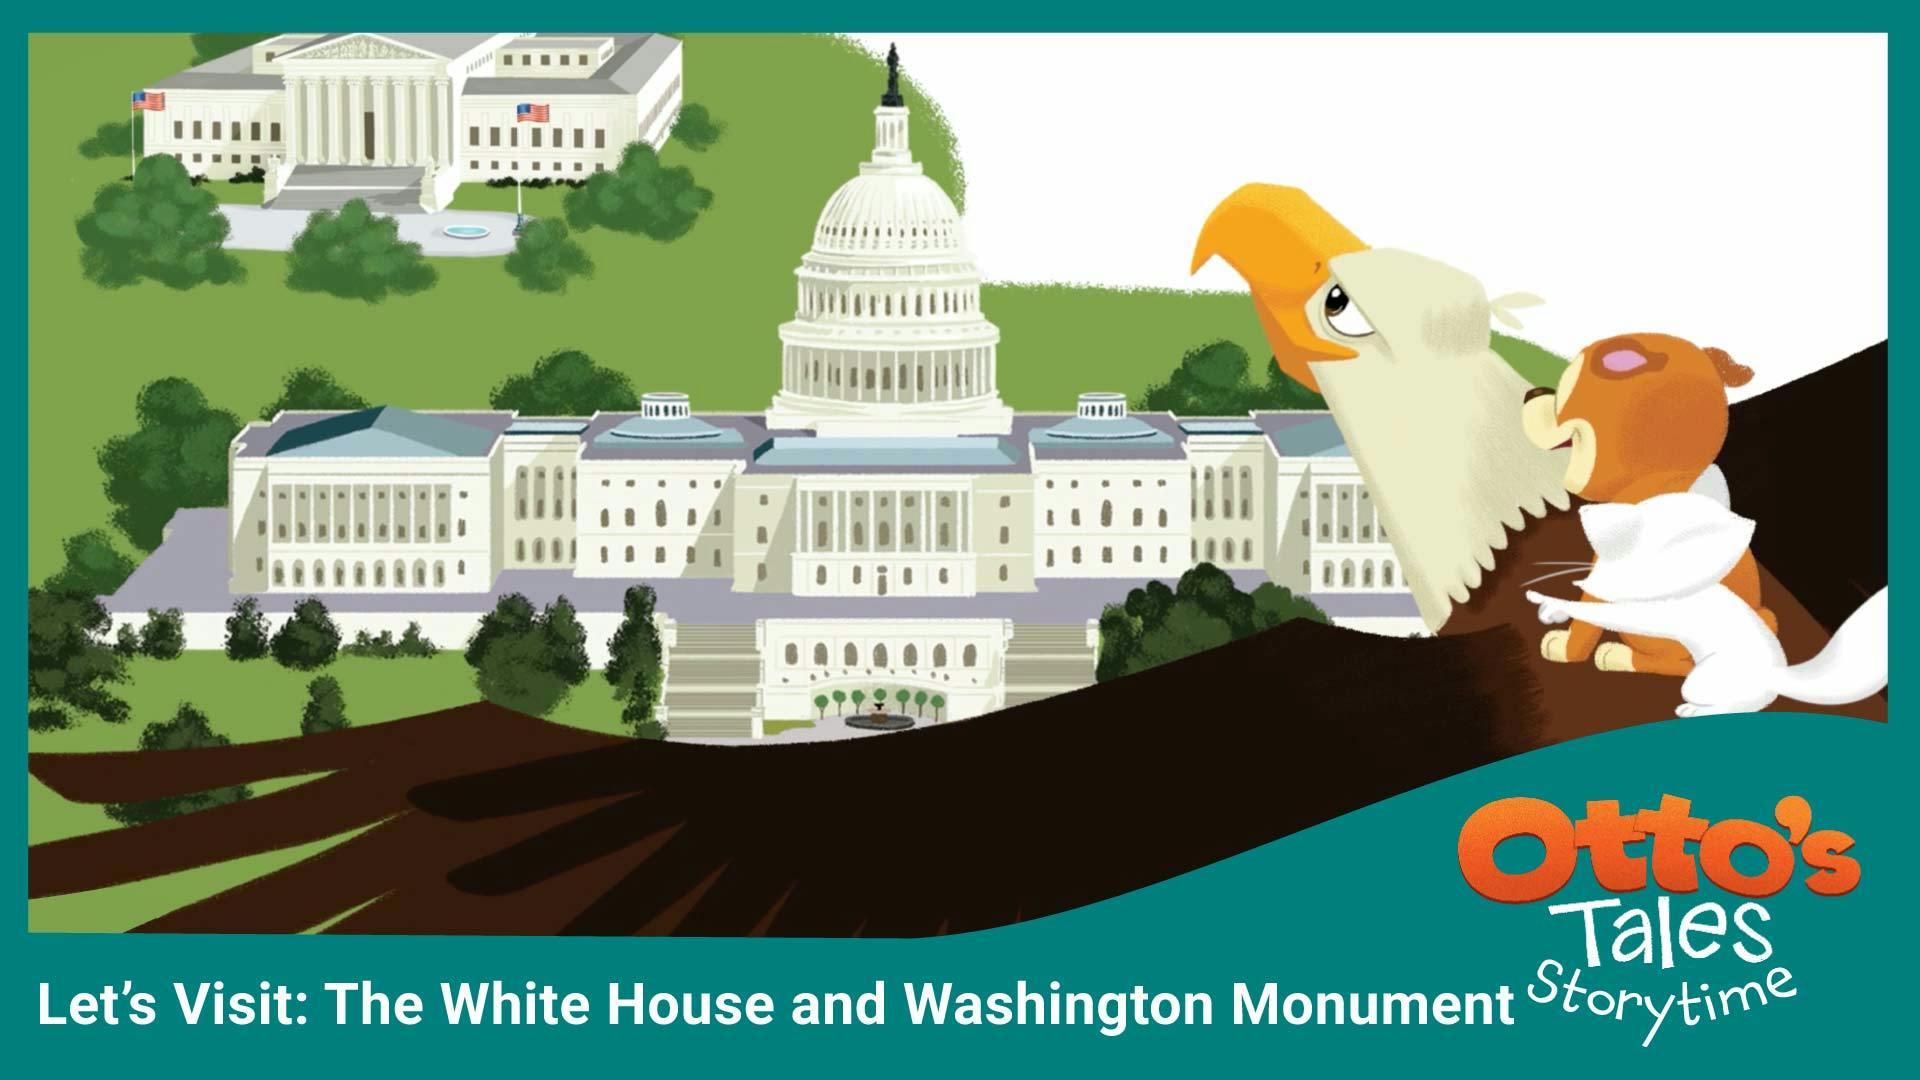 Let's Visit the White House and Washington Monument